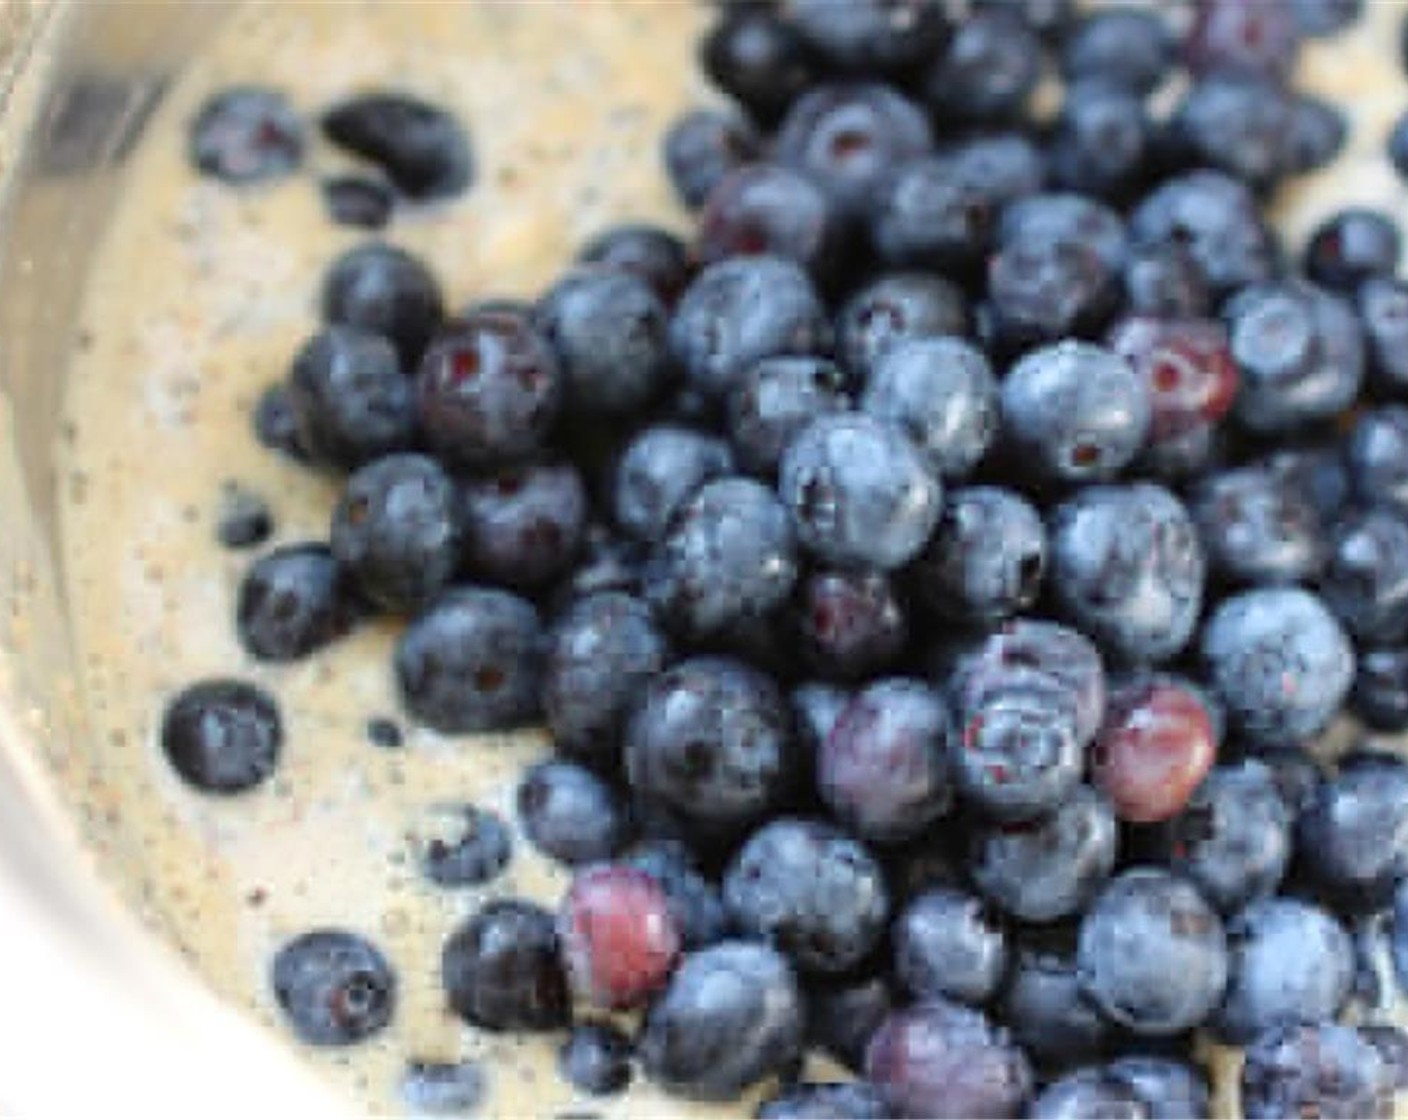 step 5 Add Vanilla Extract (1 tsp), Agave Syrup (1/4 cup), and Canola Oil (2 Tbsp) into the almond milk buttermilk mixture, then mix that into the dry flour mixture. Add in Fresh Blueberries (2 cups) and carefully stir without breaking the blueberries.